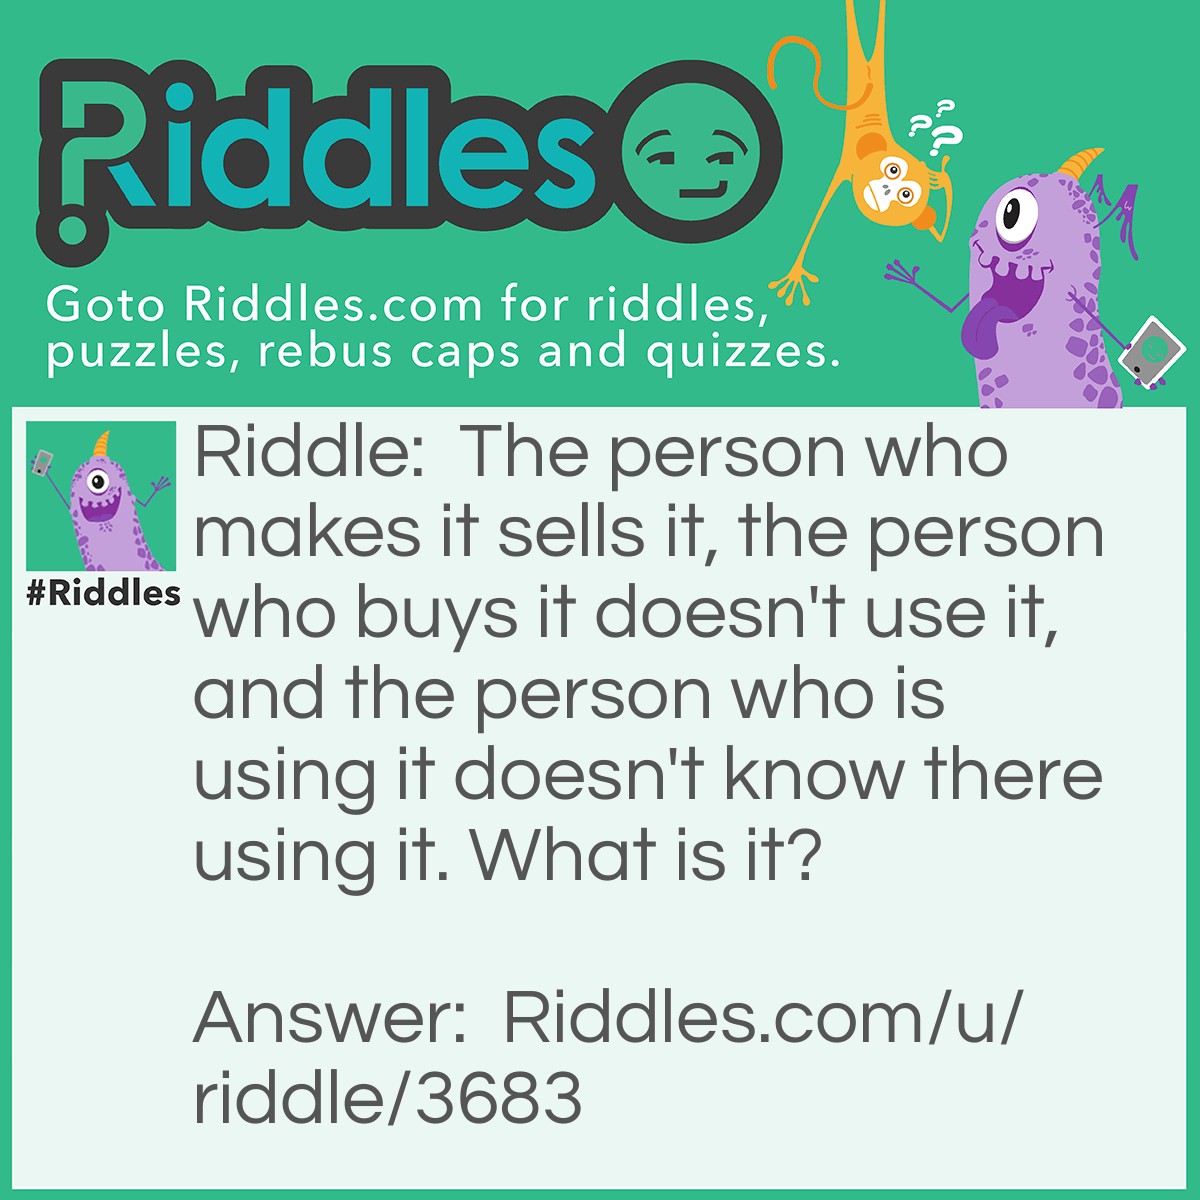 Riddle: The person who makes it sells it, the person who buys it doesn't use it, and the person who is using it doesn't know there using it. What is it? Answer: A coffin.